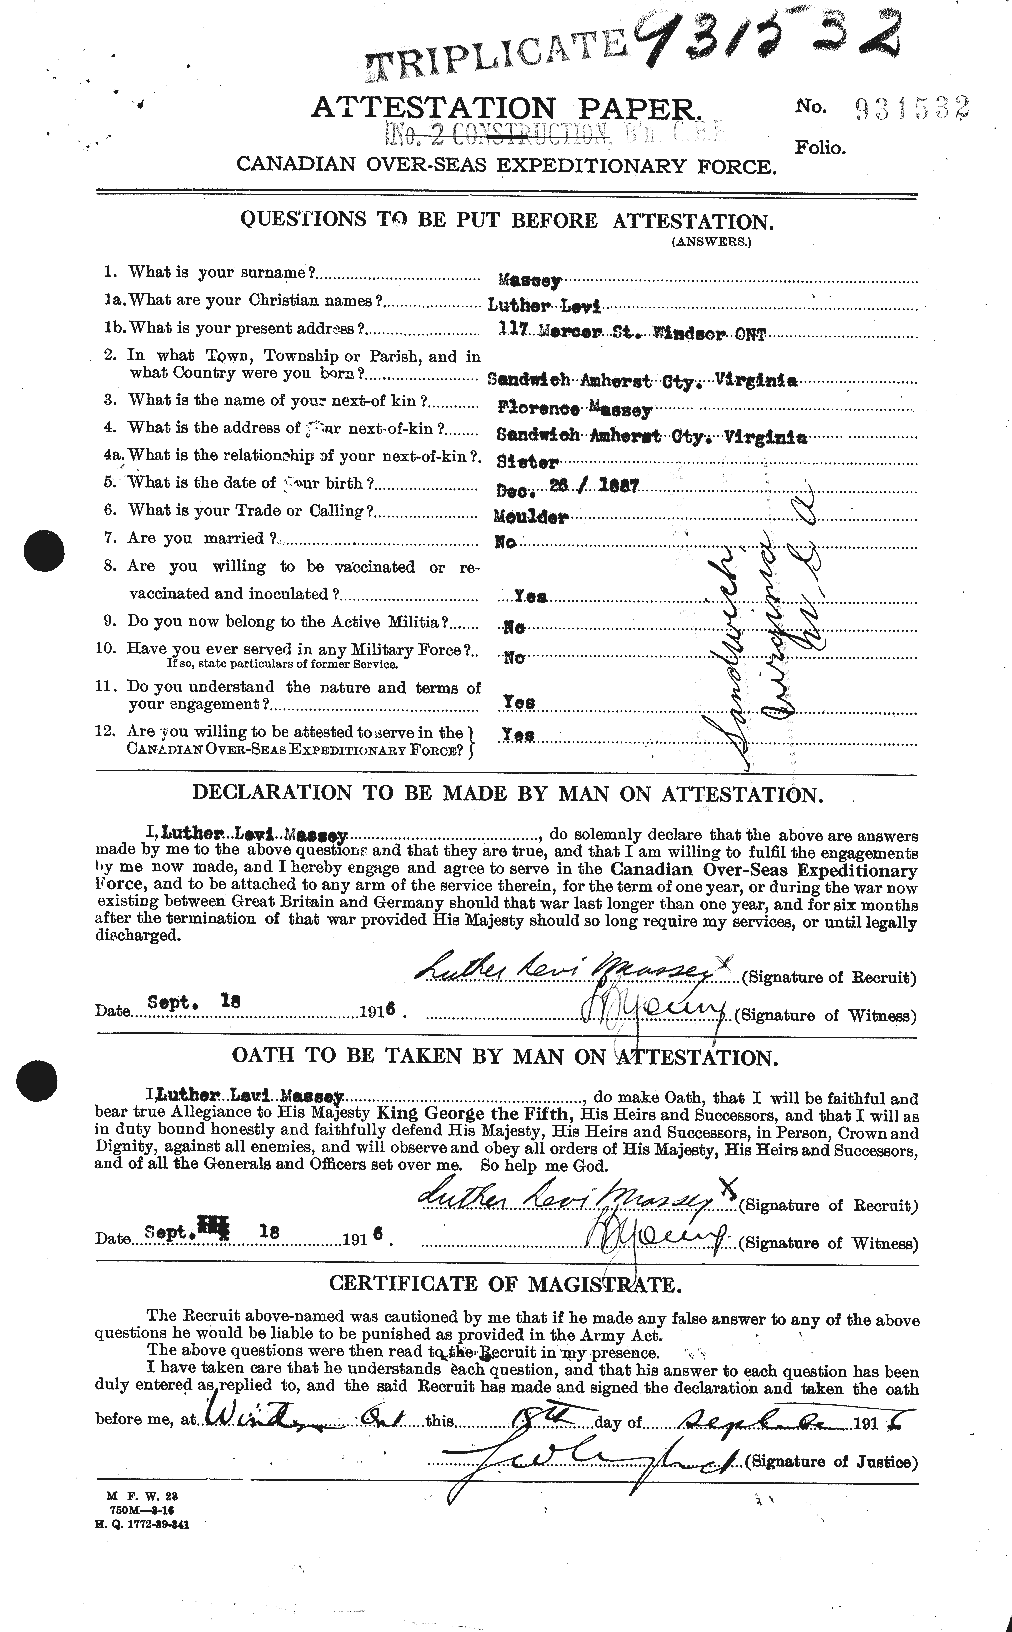 Personnel Records of the First World War - CEF 487087a